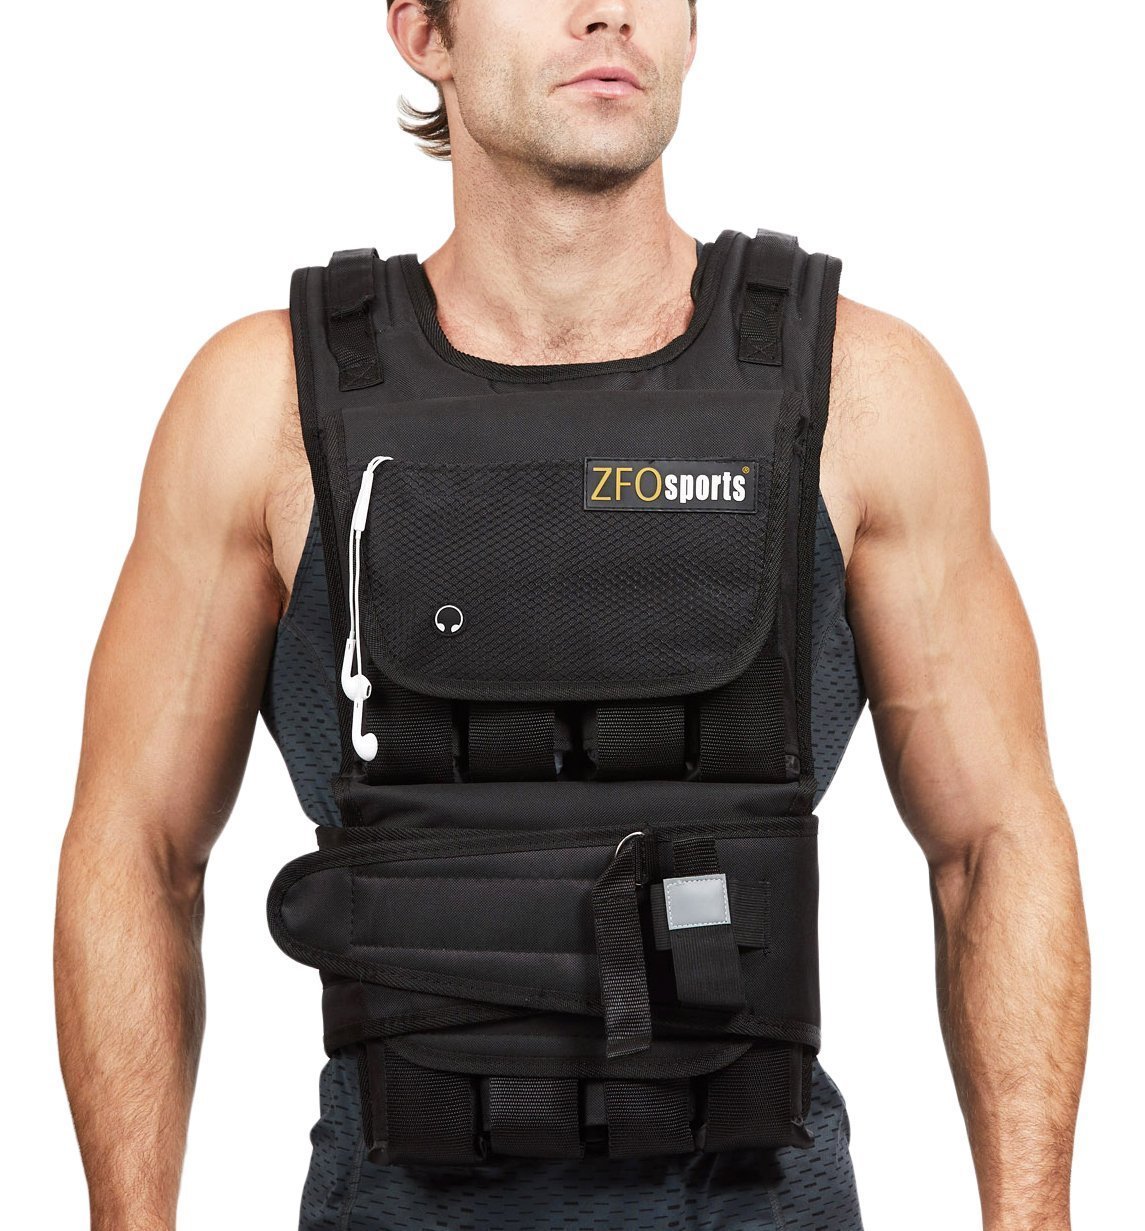 4 best weighted vests for running and crossfit that will change the way U train 6